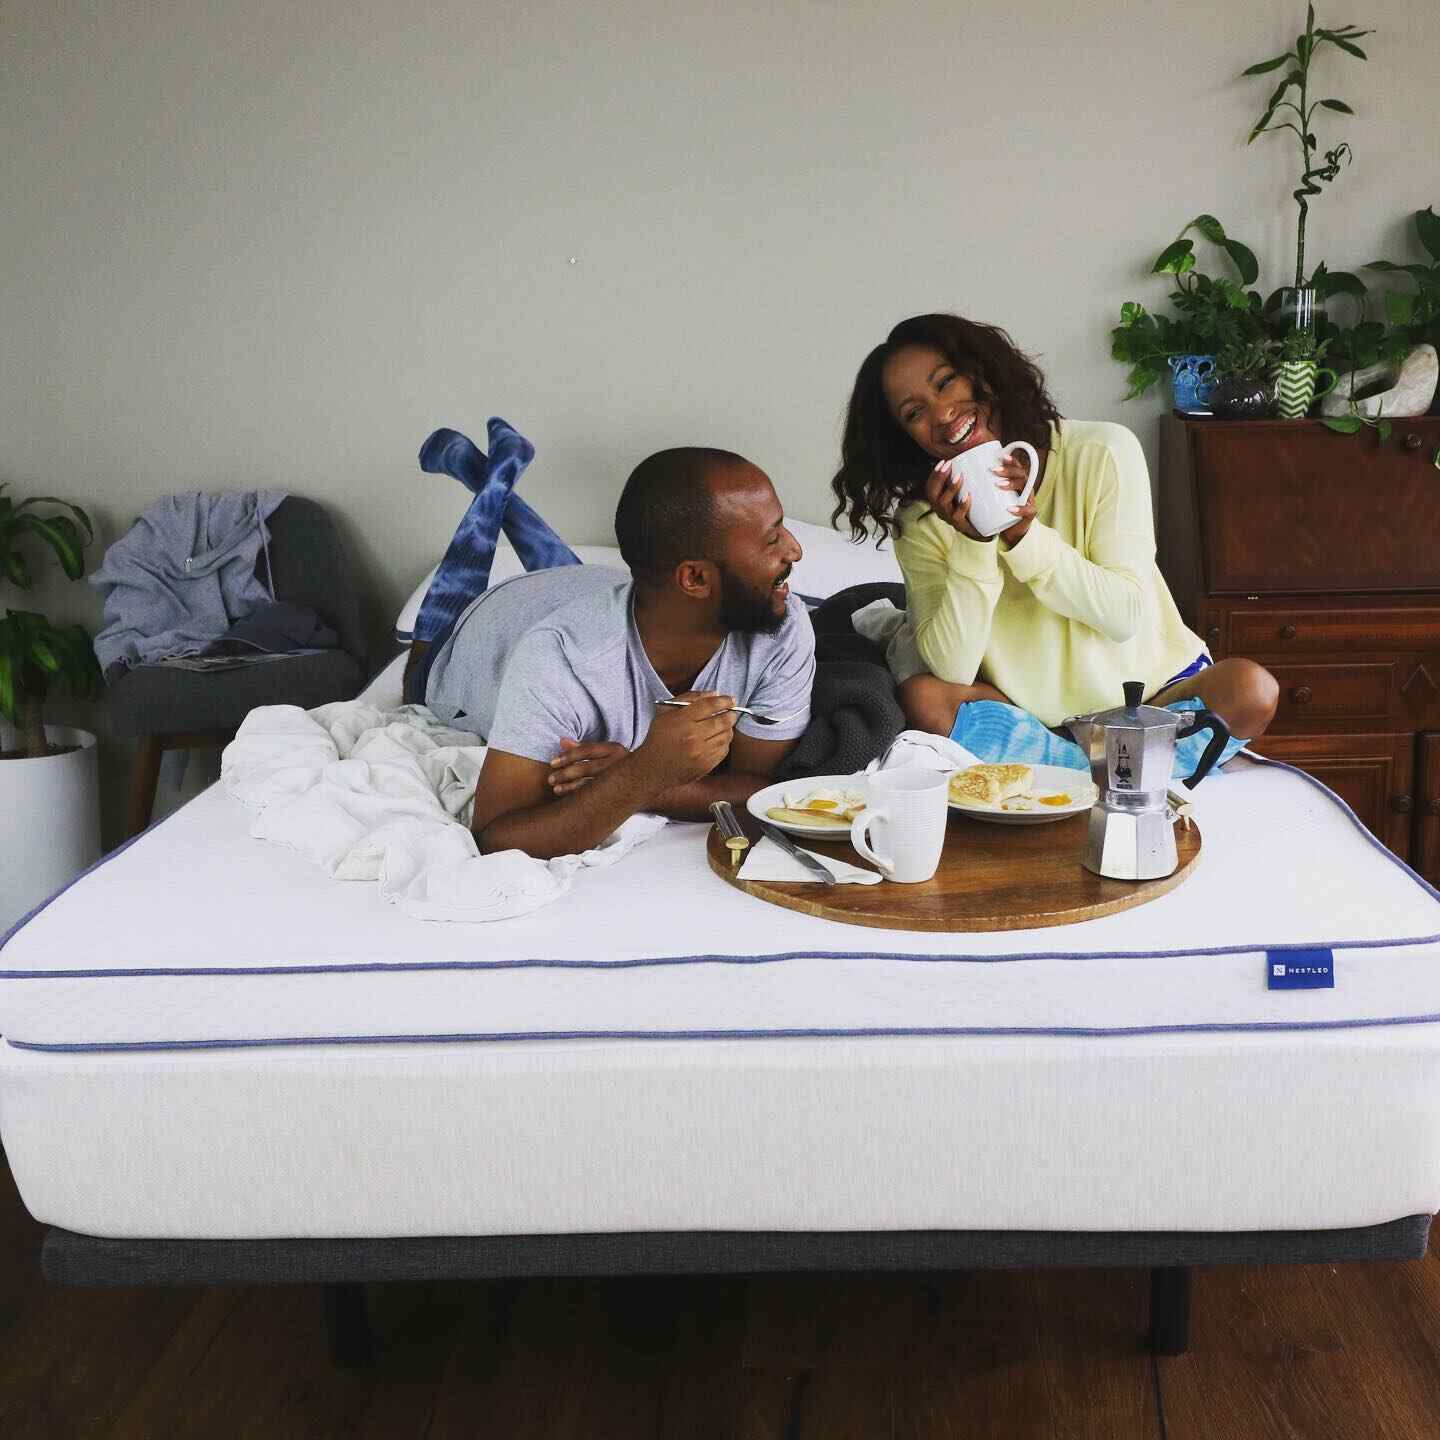 A man and a woman sit on an eco-friendly mattress topper and eat breakfast on a tray.